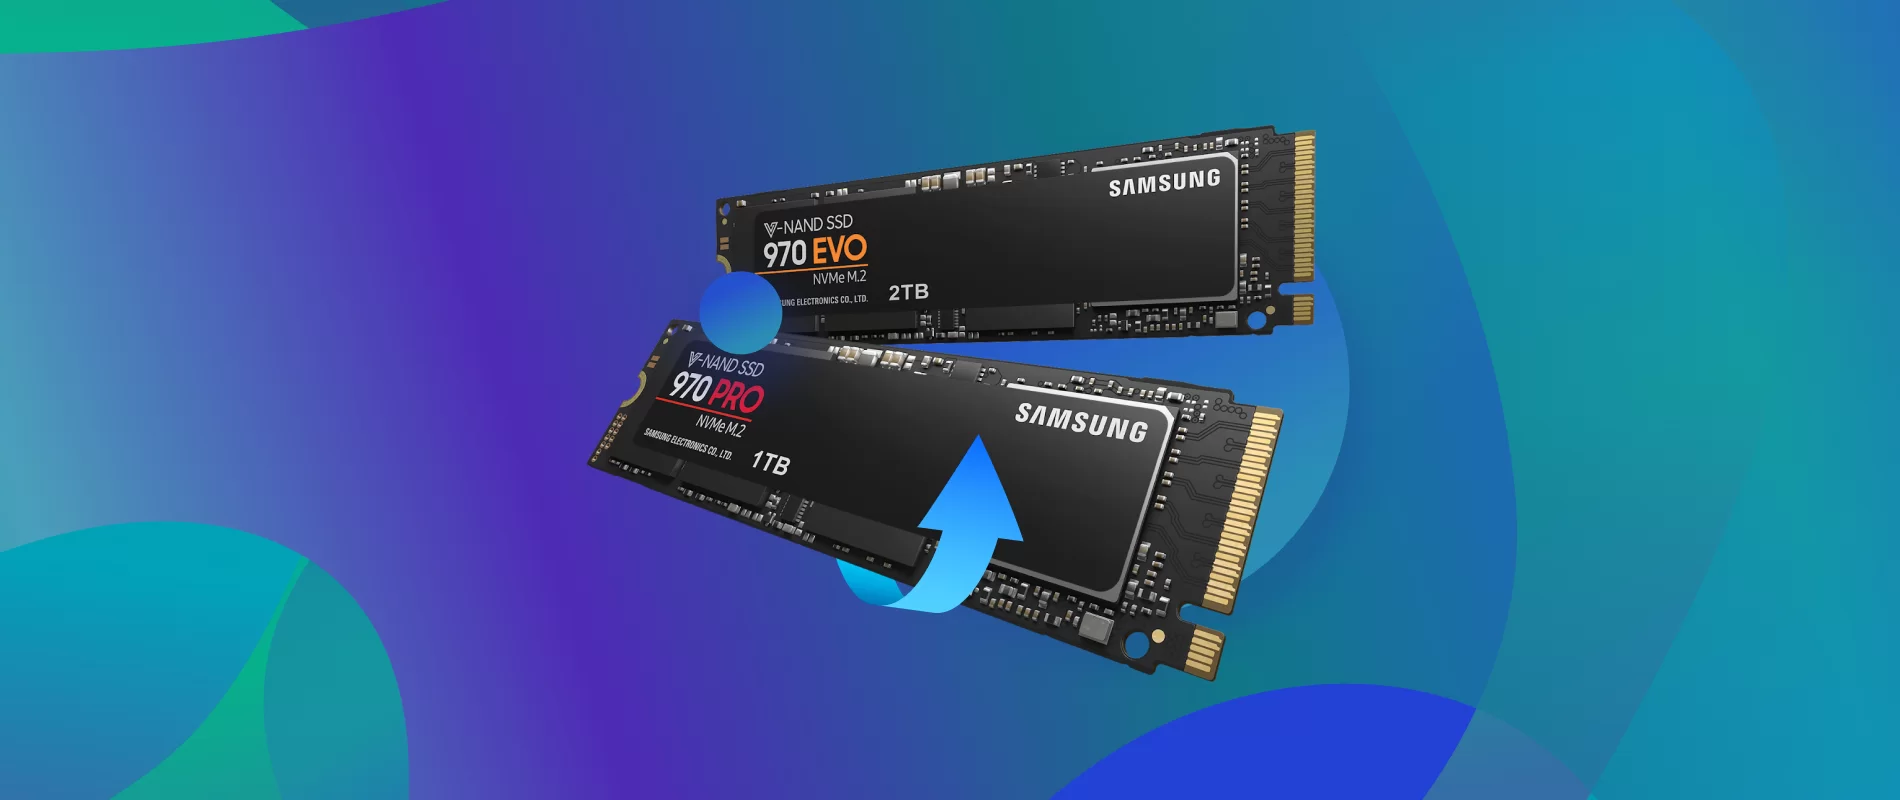 How To Transfer Data From M.2 SSD